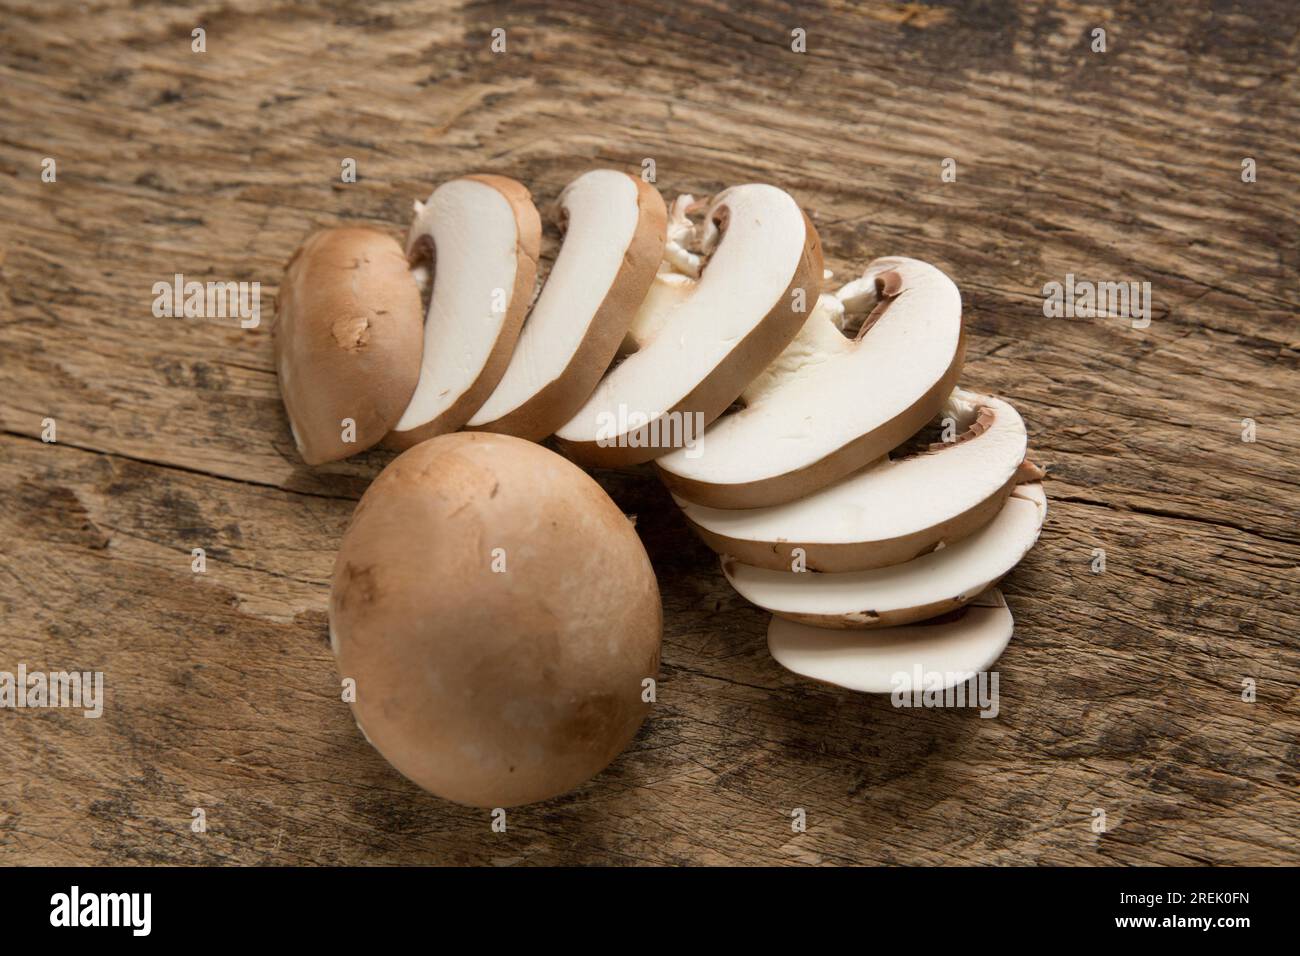 Chestnut mushrooms, grown in Poland and imported into the UK. Stock Photo